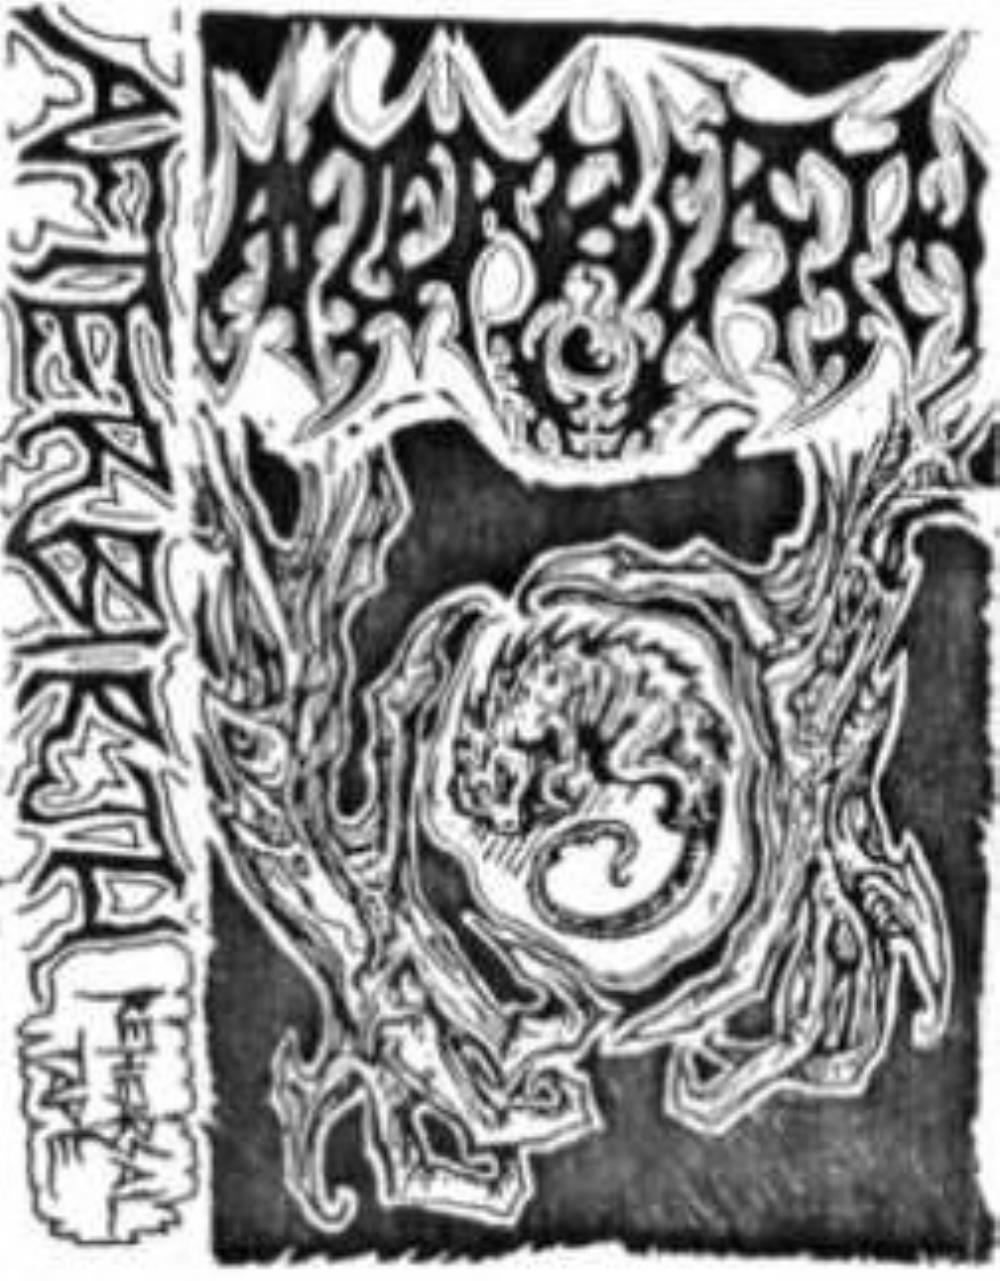 Afterbirth Rehearsal Tape album cover